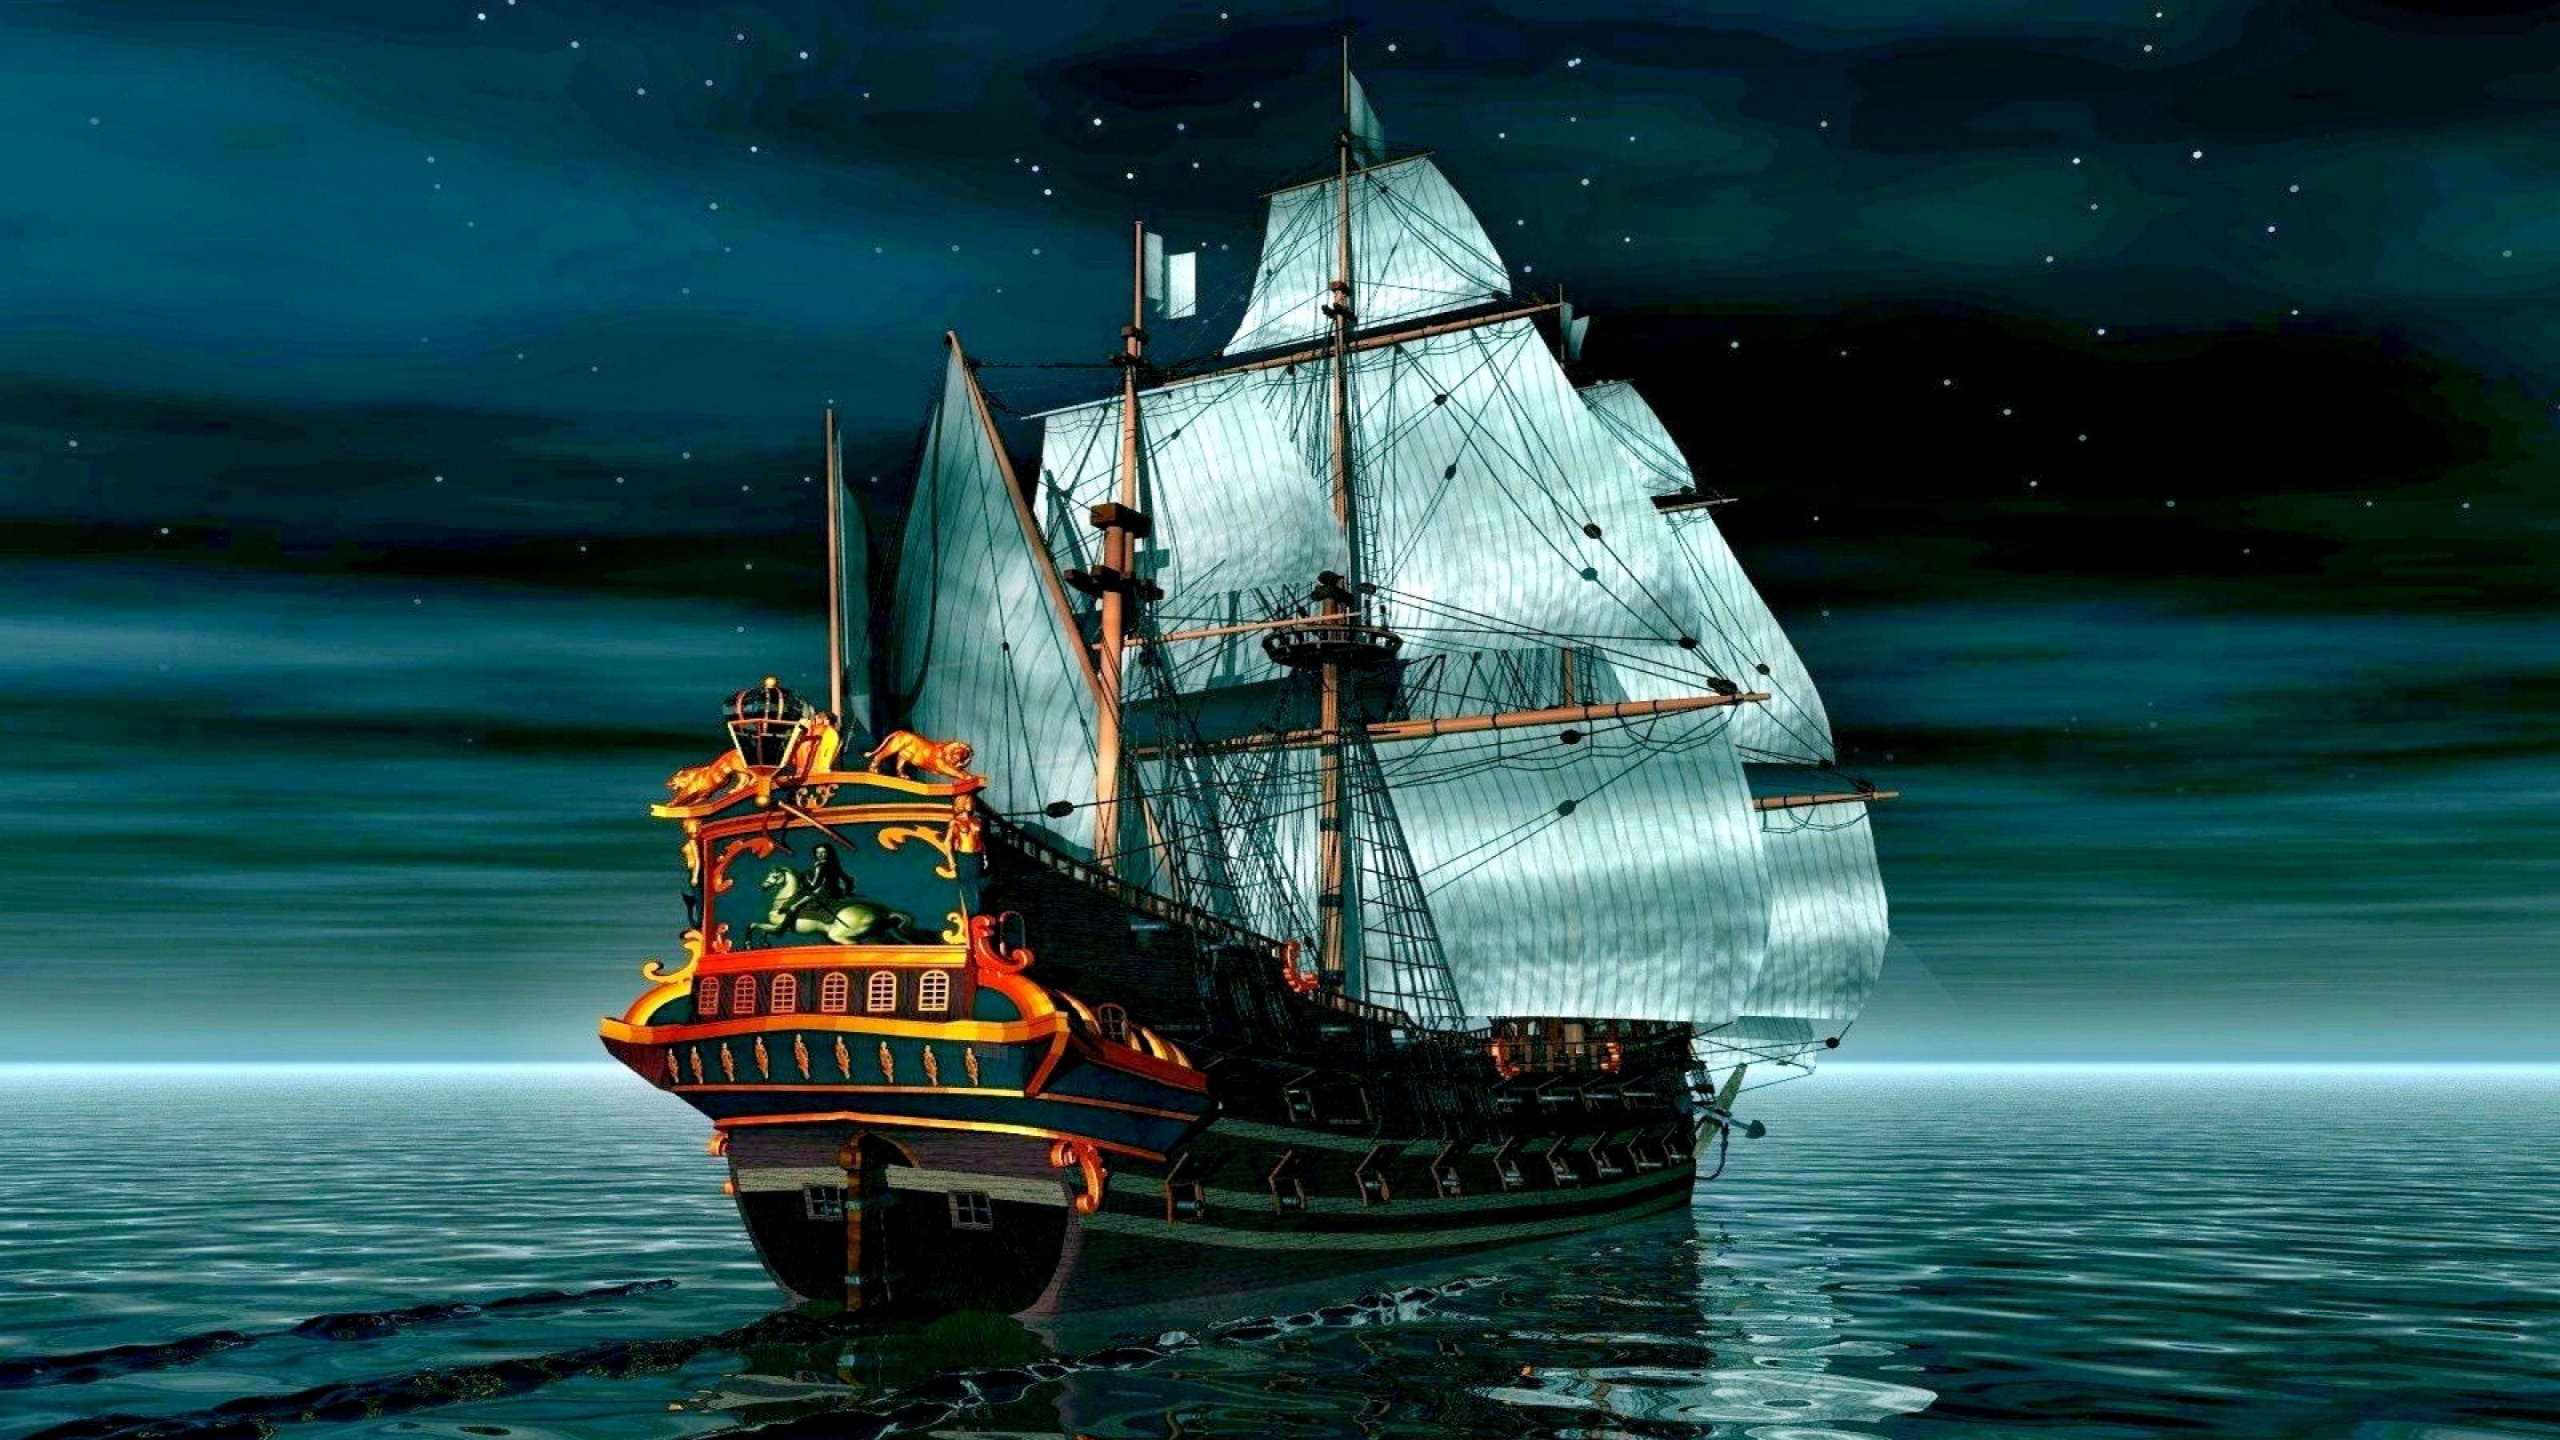 Brown and Black Galleon Ship on Sea During Night Time. Wallpaper in 2560x1440 Resolution